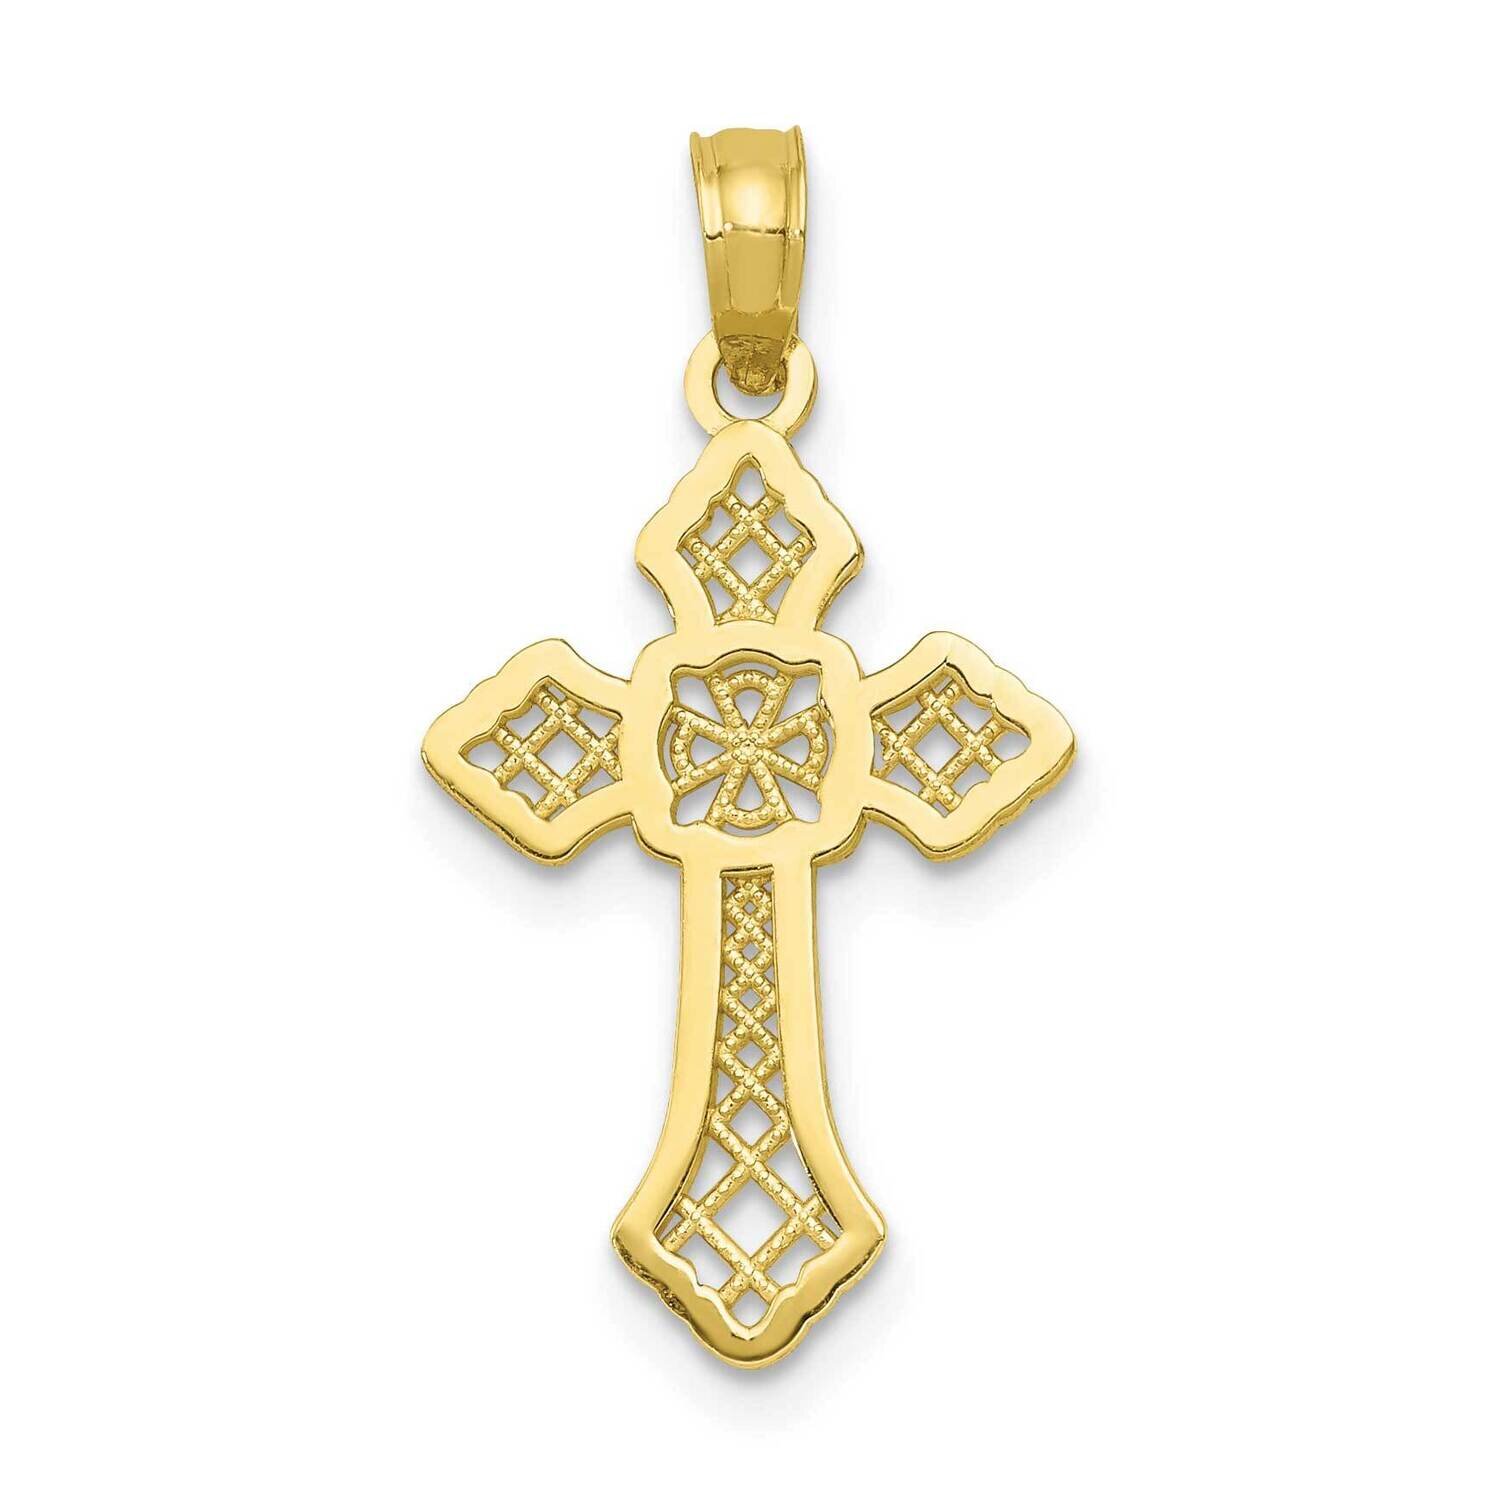 Cross with Lace Center Arrow Tips Pendant 10K Gold Polished 10K5457